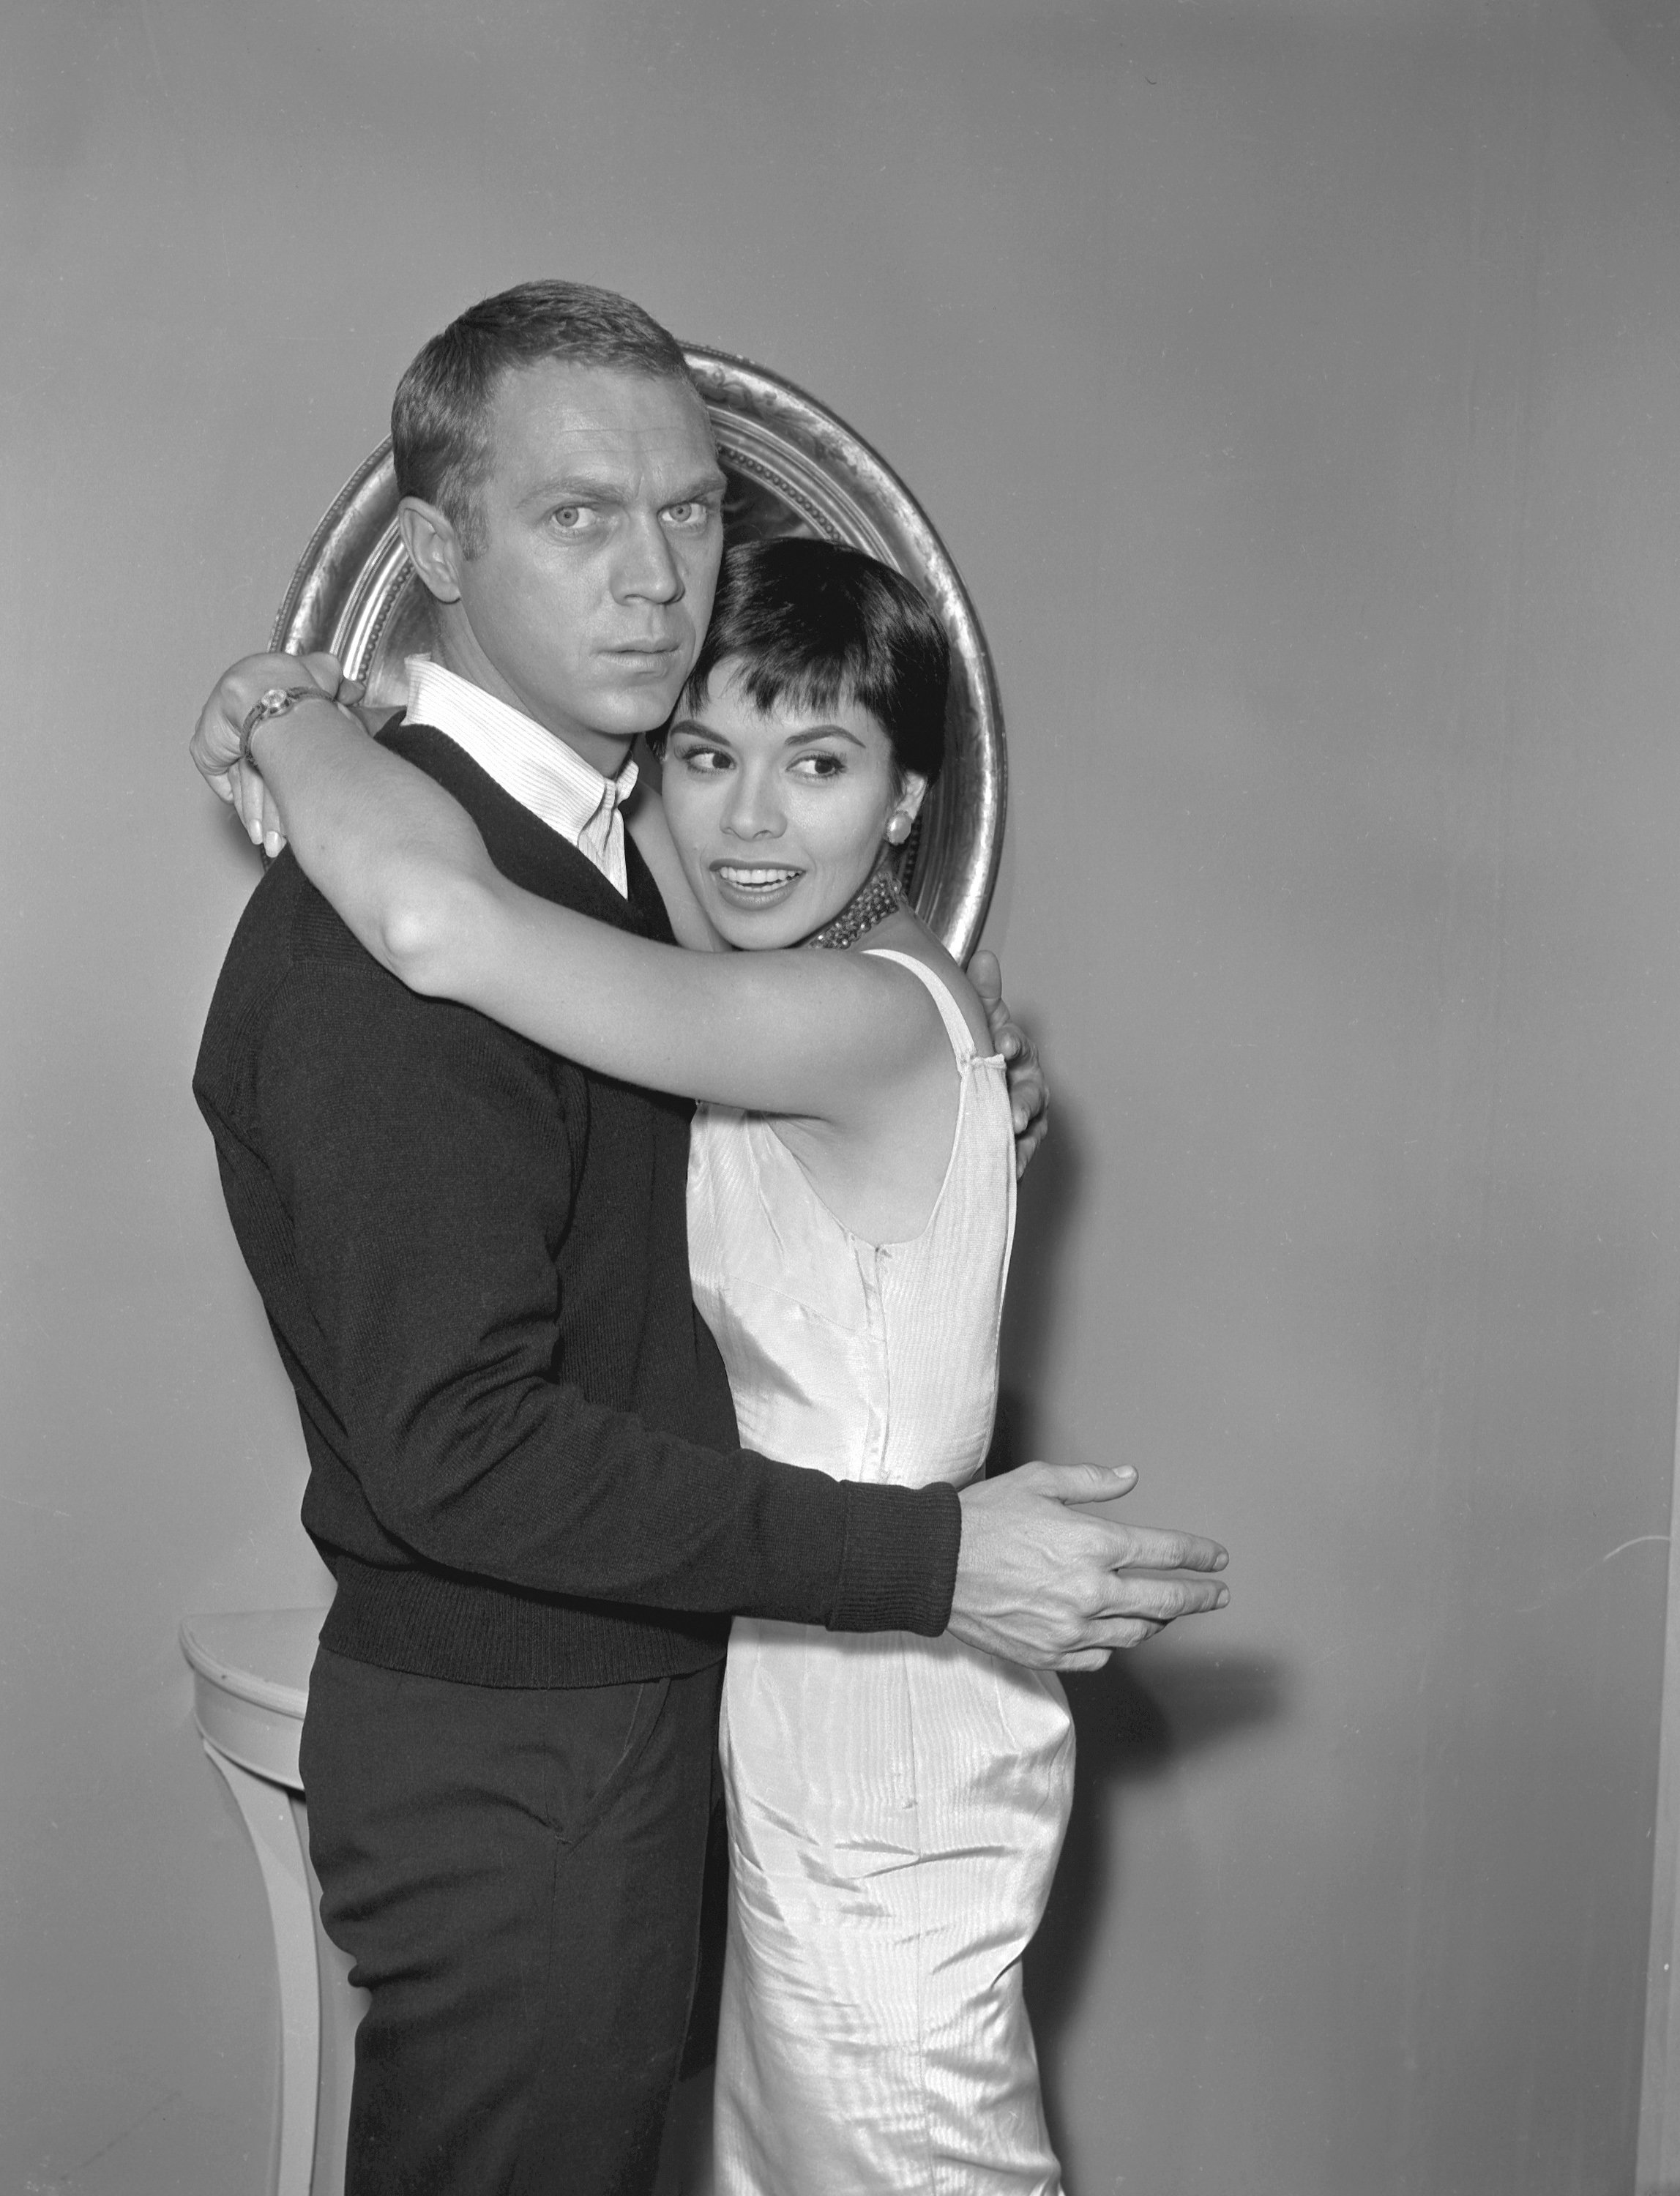 Steve McQueen, left, embraces his first wife Neile Adams in 1959